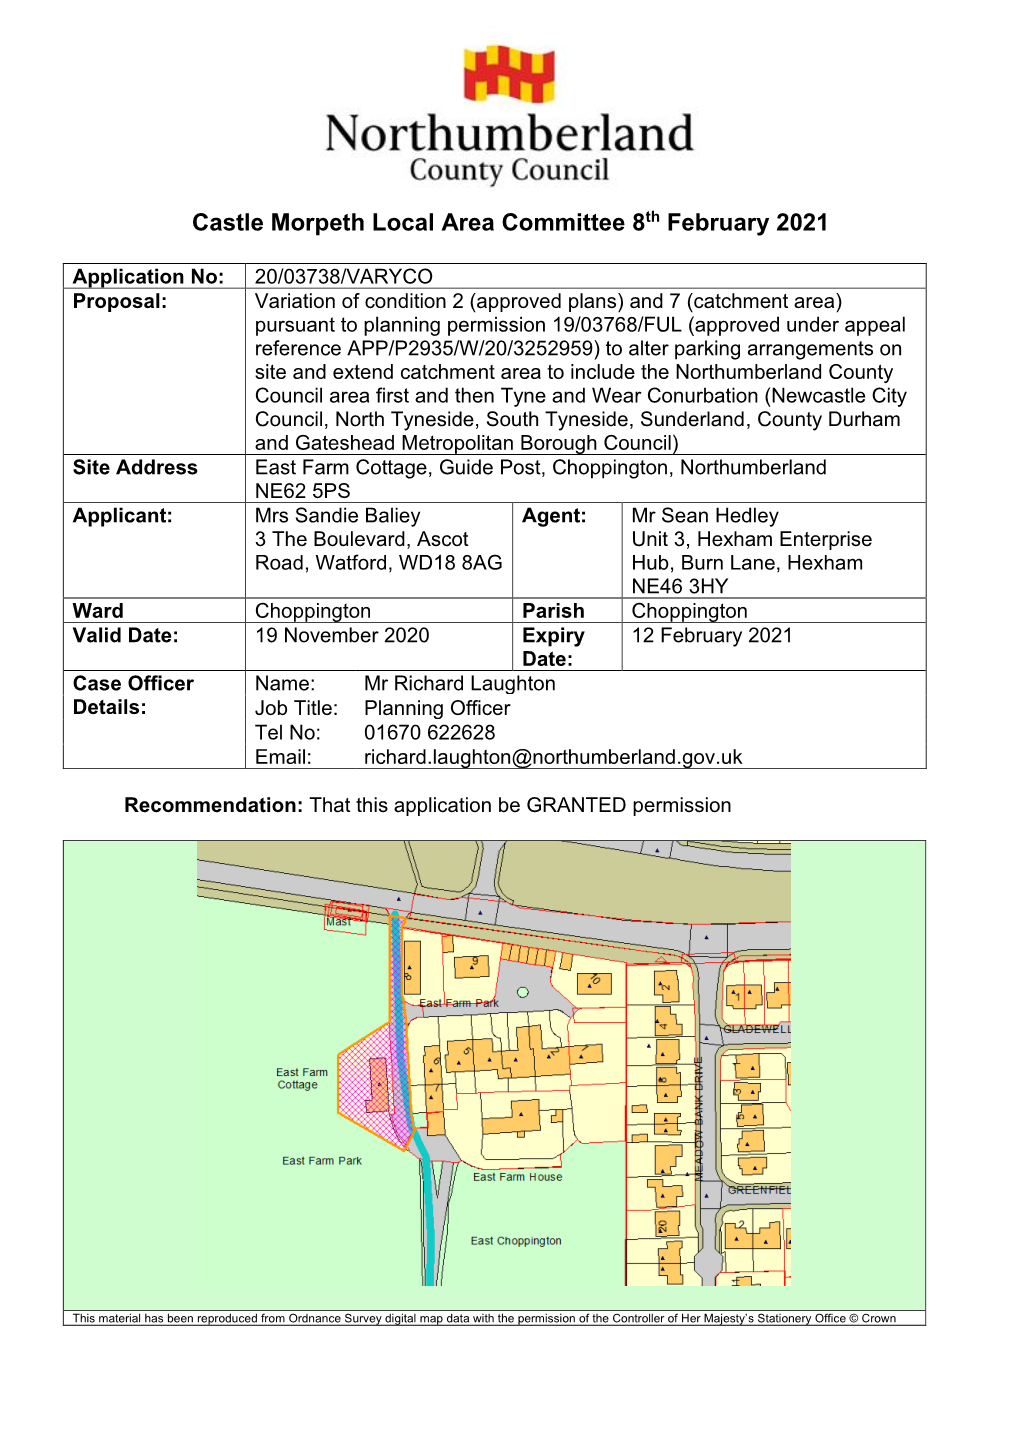 07 20-03738-VARYCO East Farm Guide Post Committee Report.Pdf